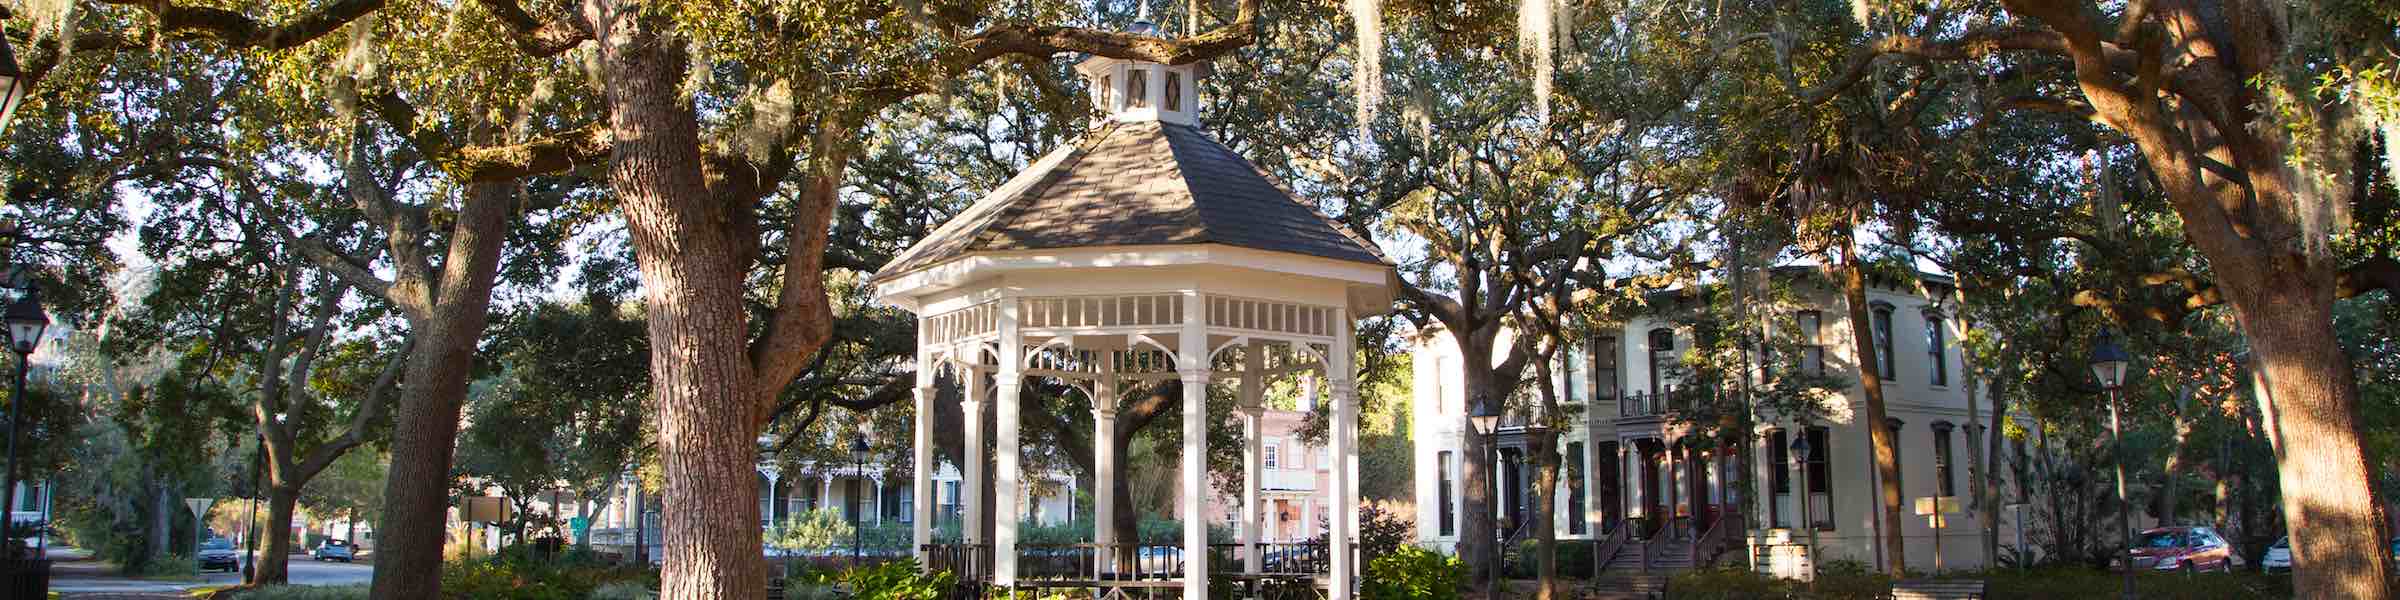 A view of the gazebo in Whitefield Square, Savannah, GA.